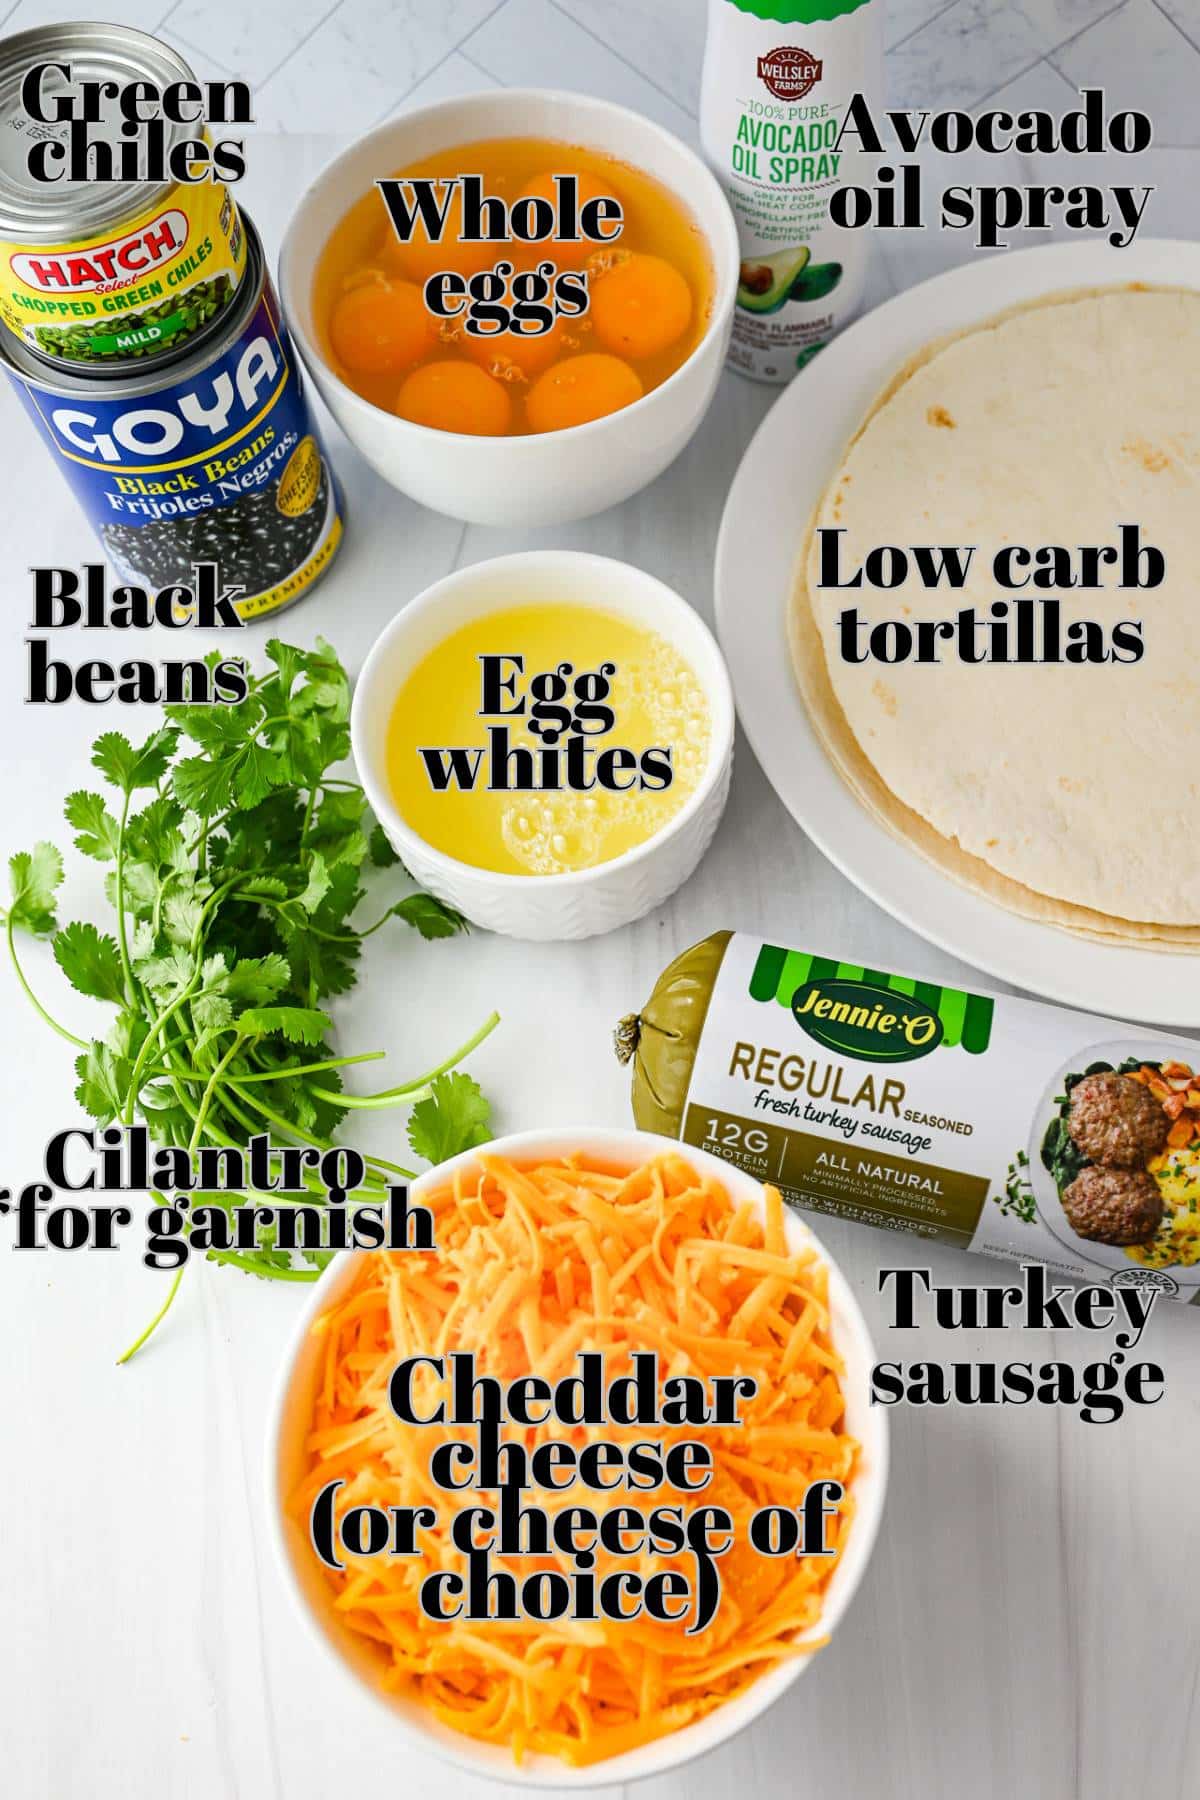 ingredients for green chile breakfast burritos measured out on a counter